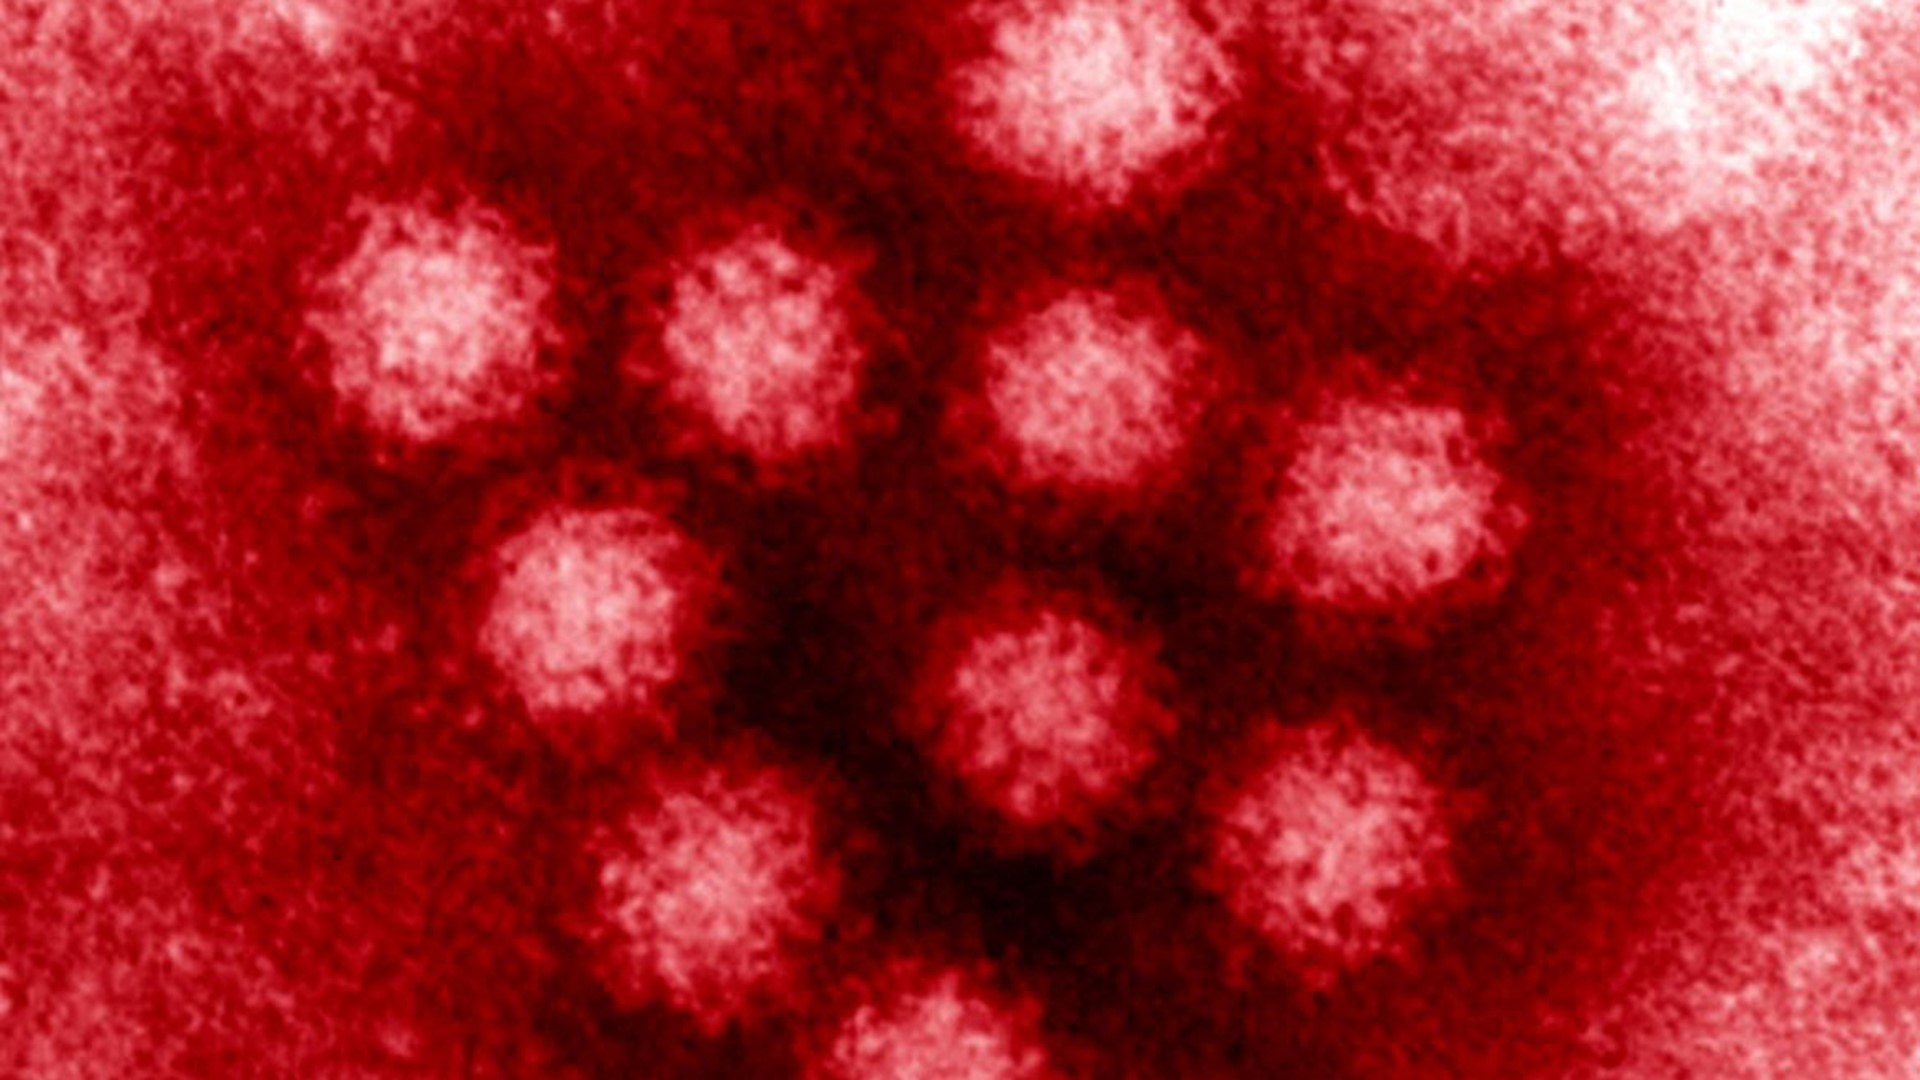 Roughly 50 educators were sickened by norovirus after a catered teacher appreciation luncheon on May 9 at Clark Elementary School in Tampa, health officials confirmed Thursday.

More than 100 staff members ate the food, which was provided by a local restaurant. Approximately half of them became sick afterward.

As of this week, authorities say they don't believe any students got ill. A school official said there is no outbreak on campus.